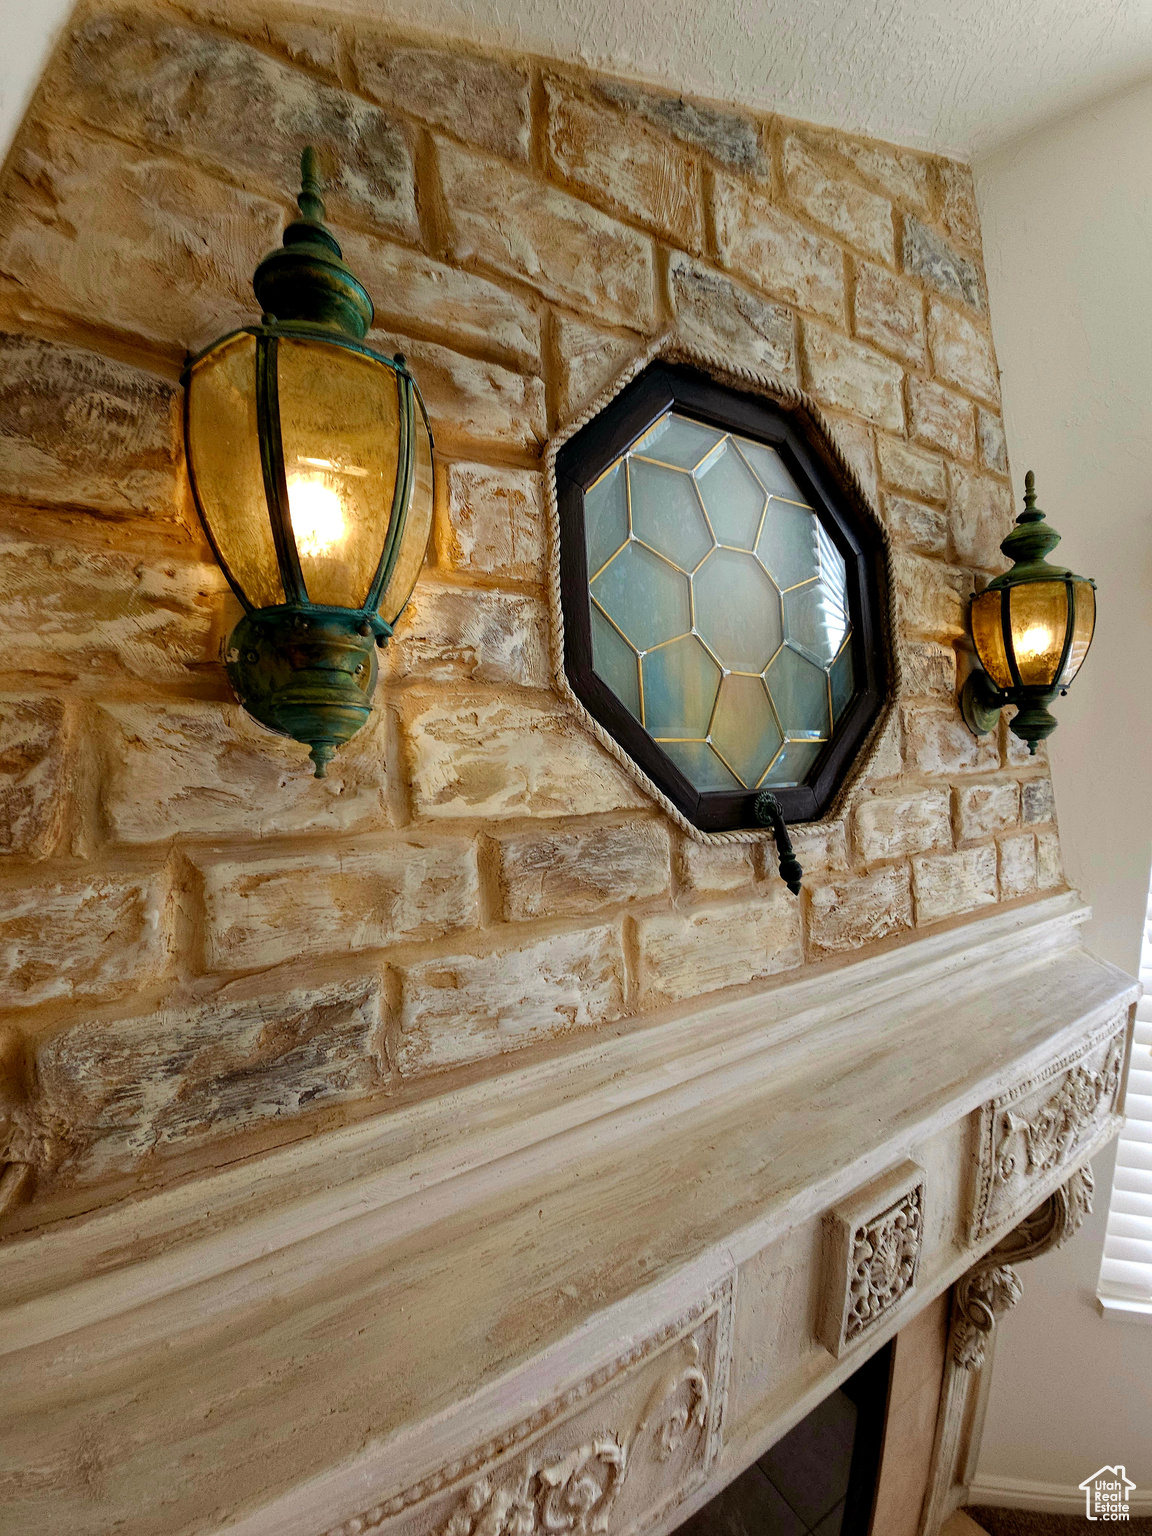 Architectural detailing and millwork featured on the fireplace hood.